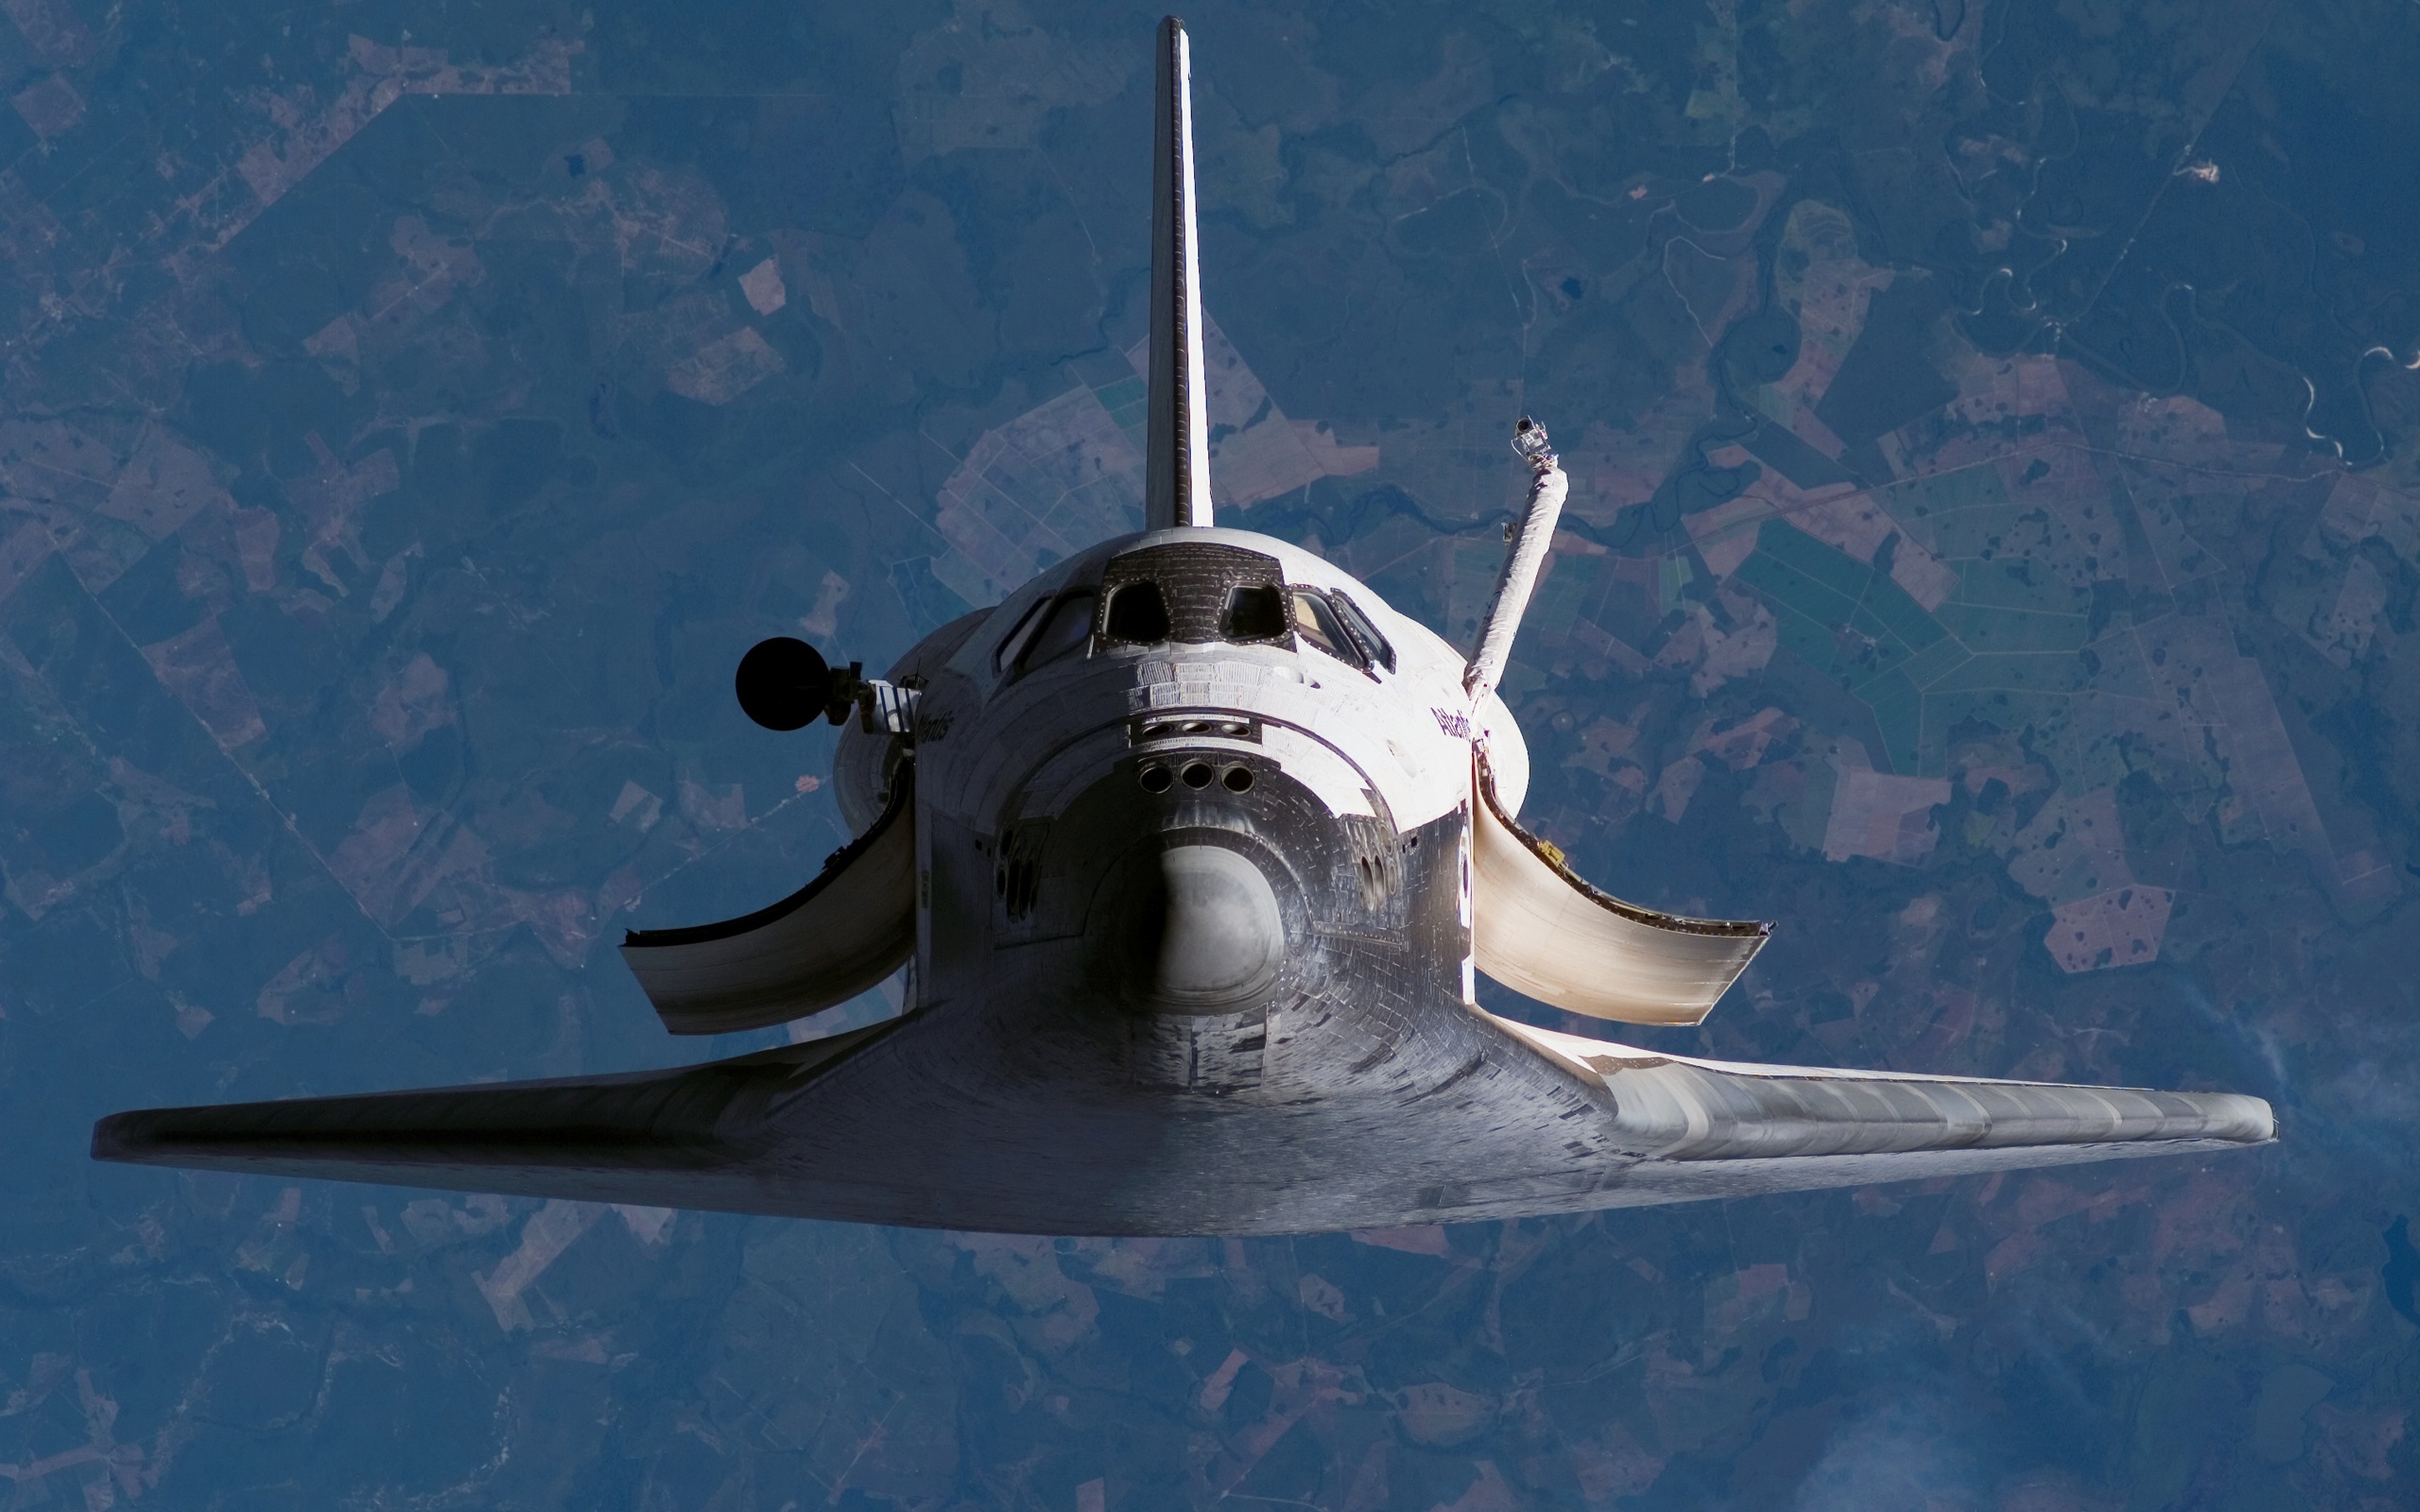 100+] Space Shuttle Wallpapers | Wallpapers.com